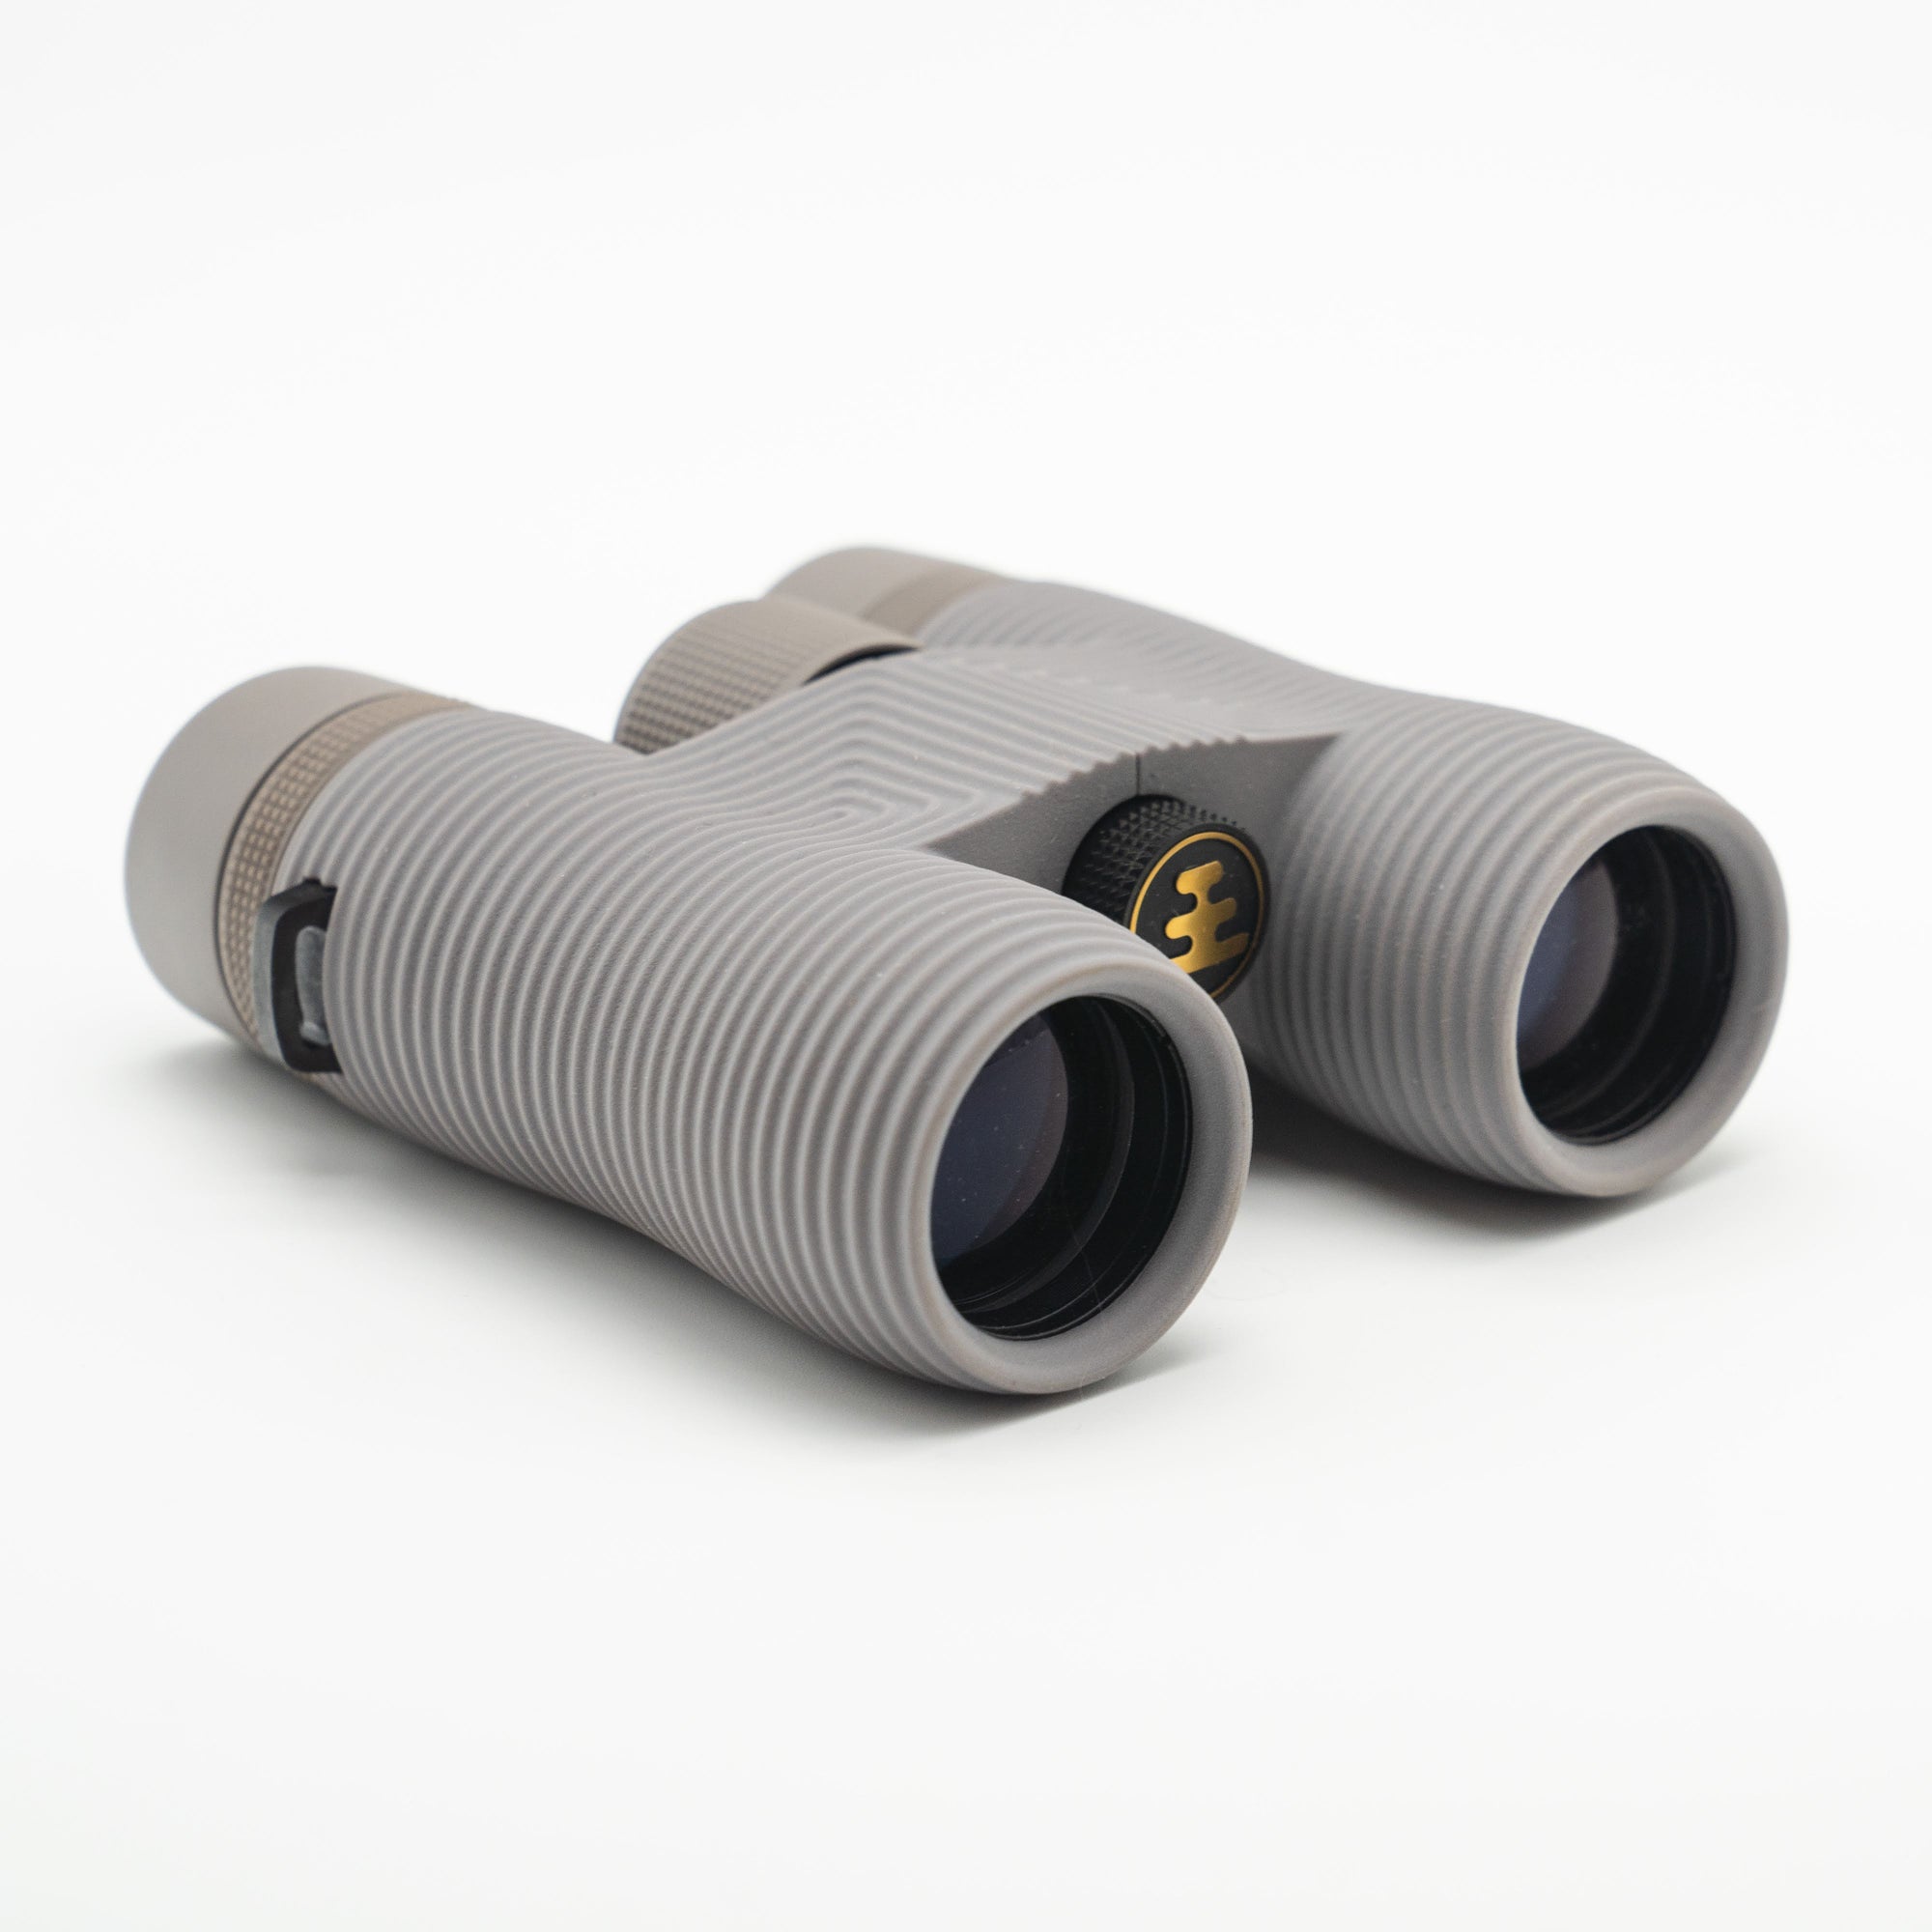 Featured product image for Field Issue 32 Caliber Binoculars (8X32)